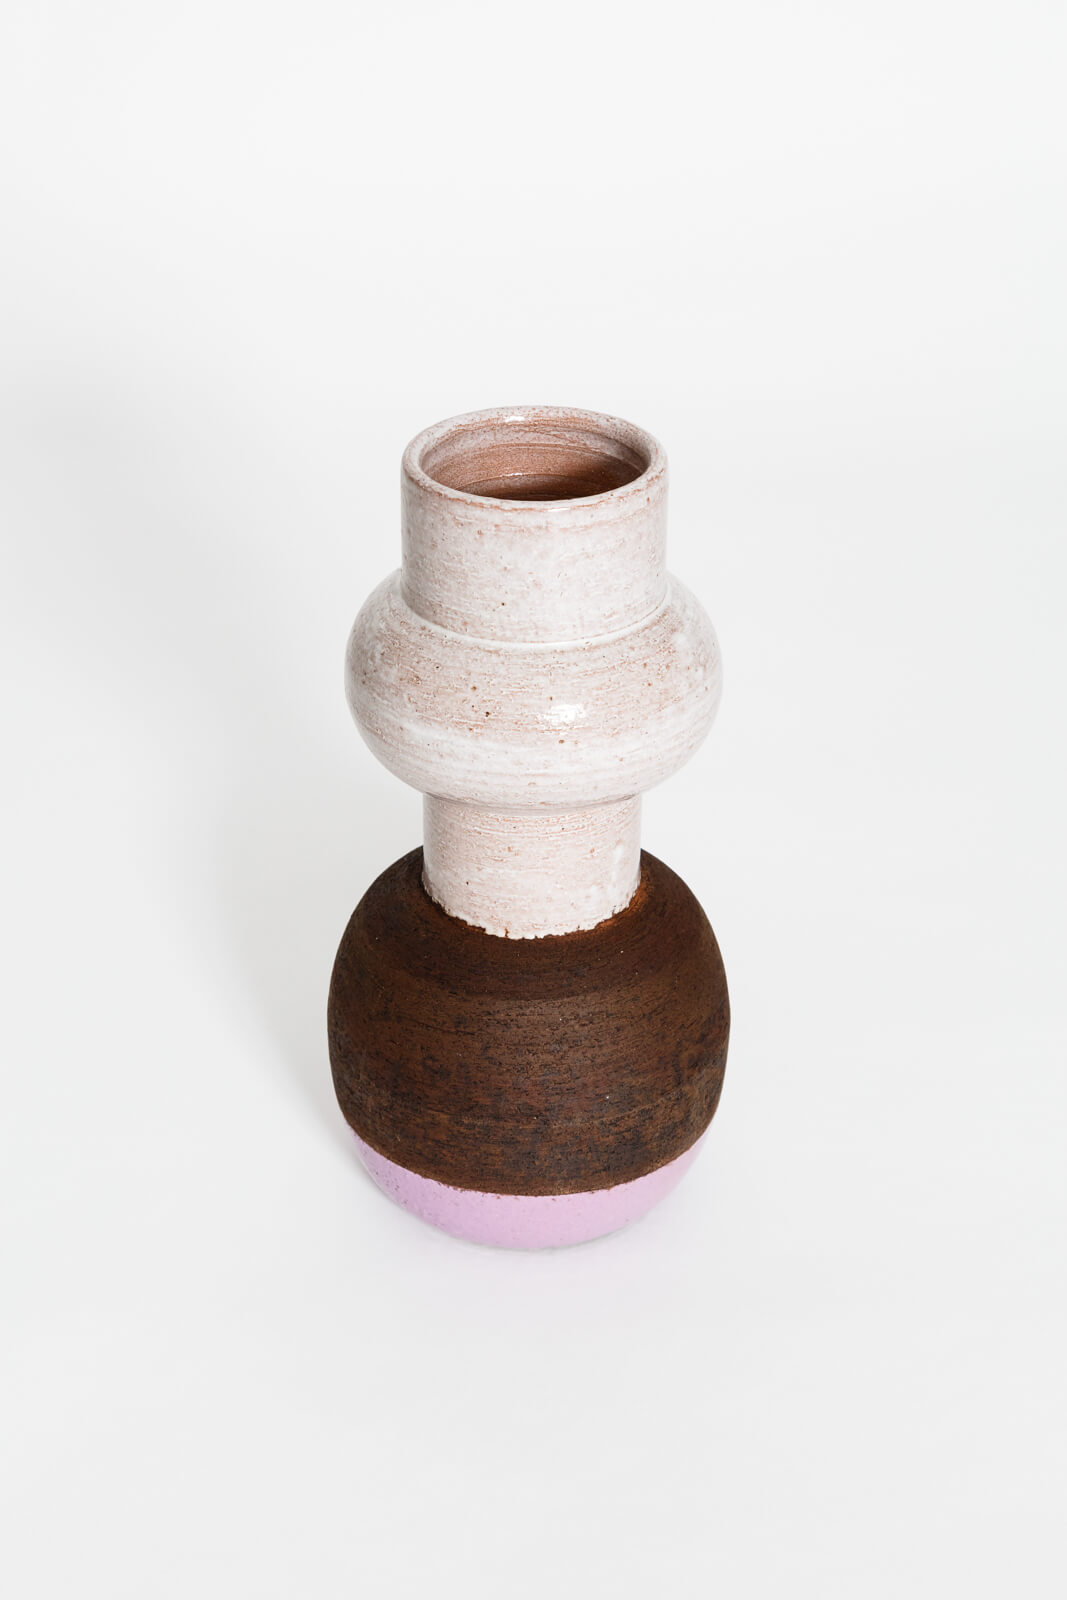 Vase № 17/20 by Ettore Sottsass for sale